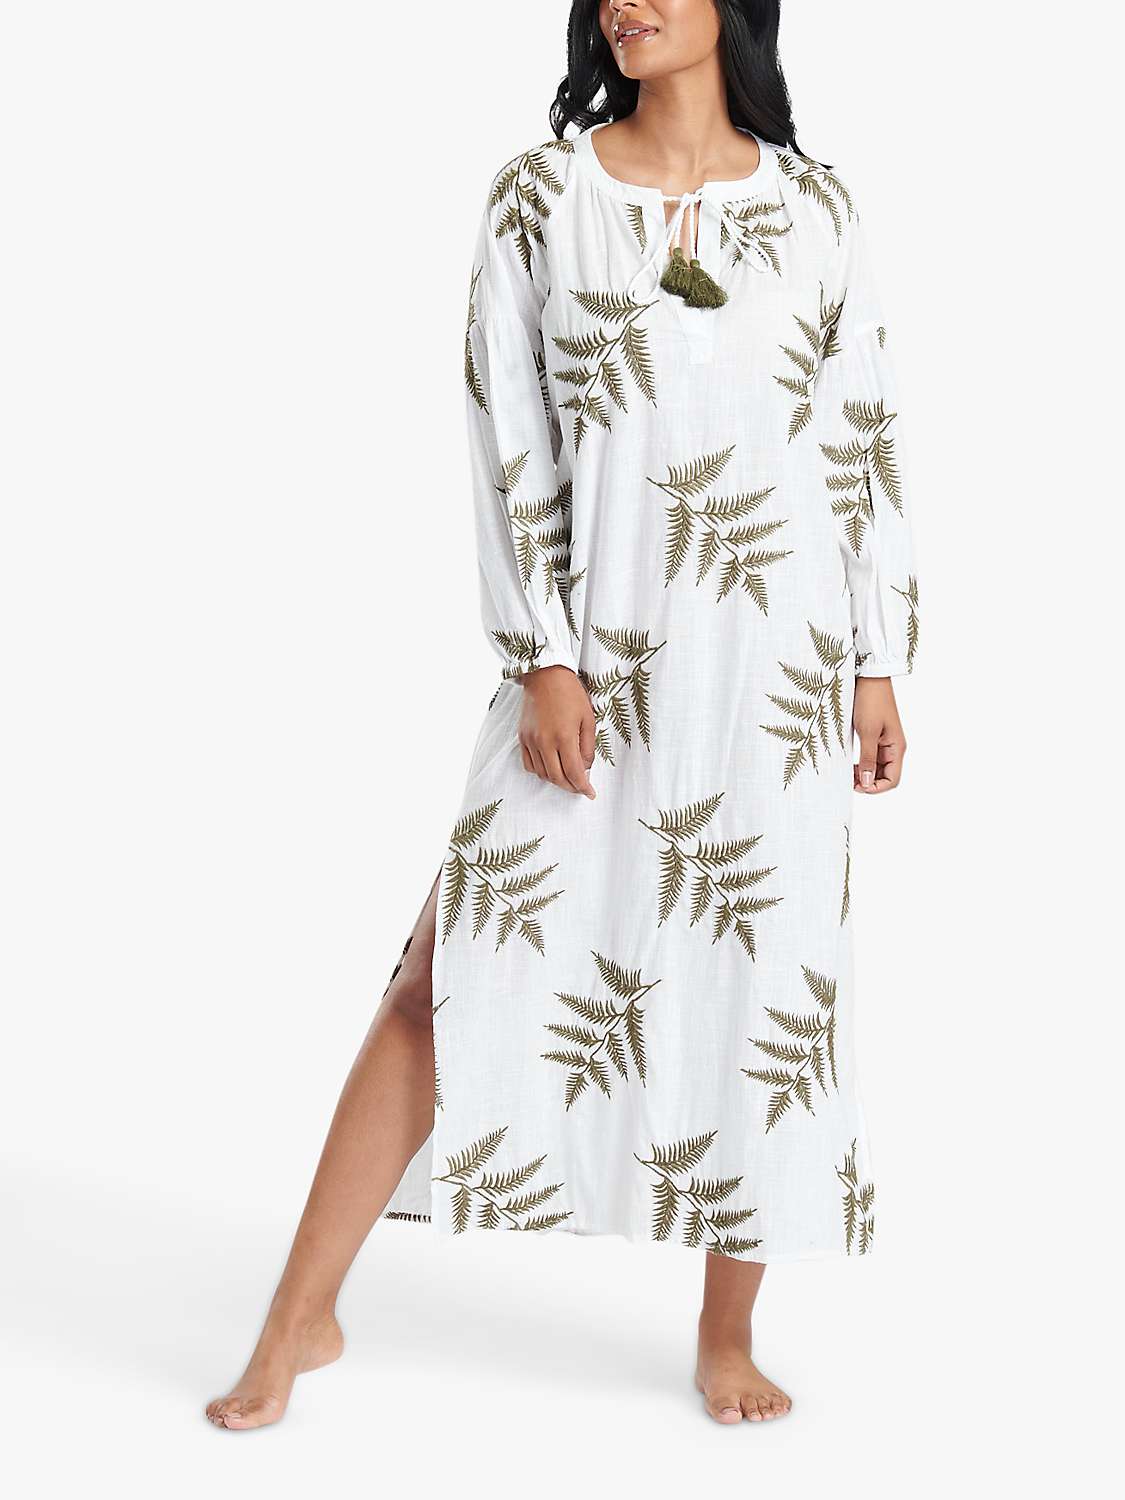 Buy South Beach Leaf Embroidery Beach Maxi Dress, White/Green Online at johnlewis.com